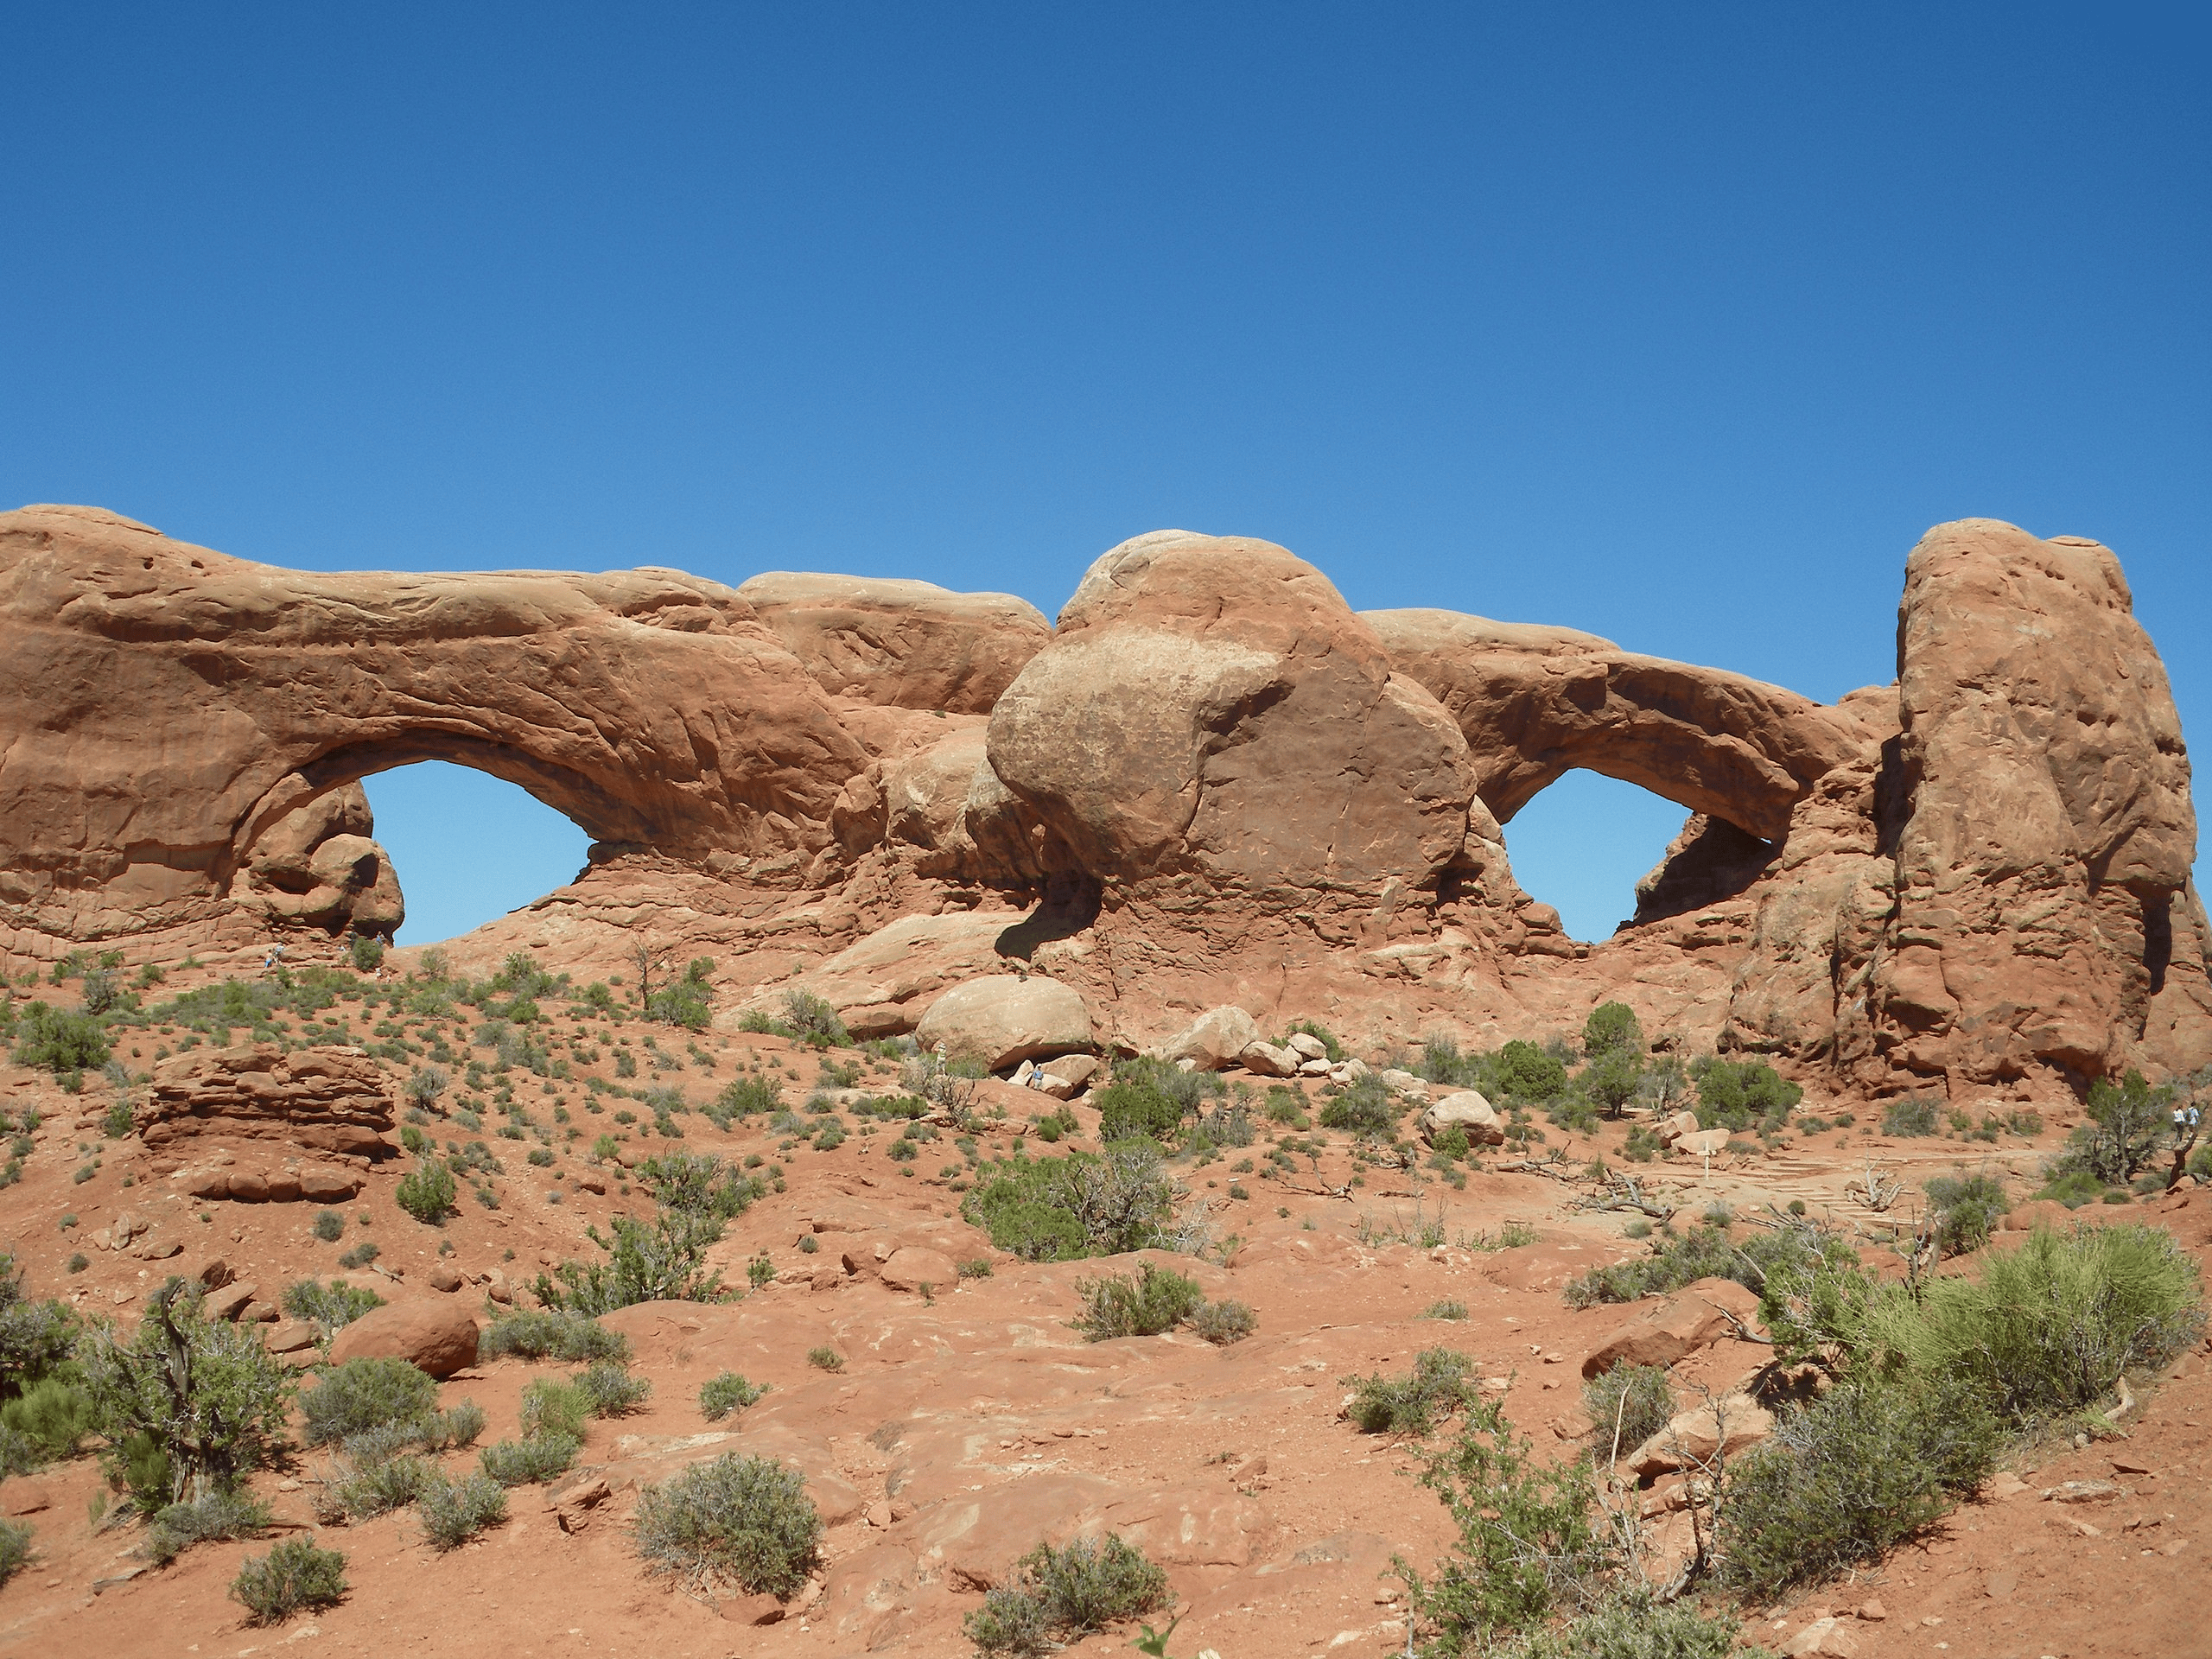 Spectacles at Arches National Park